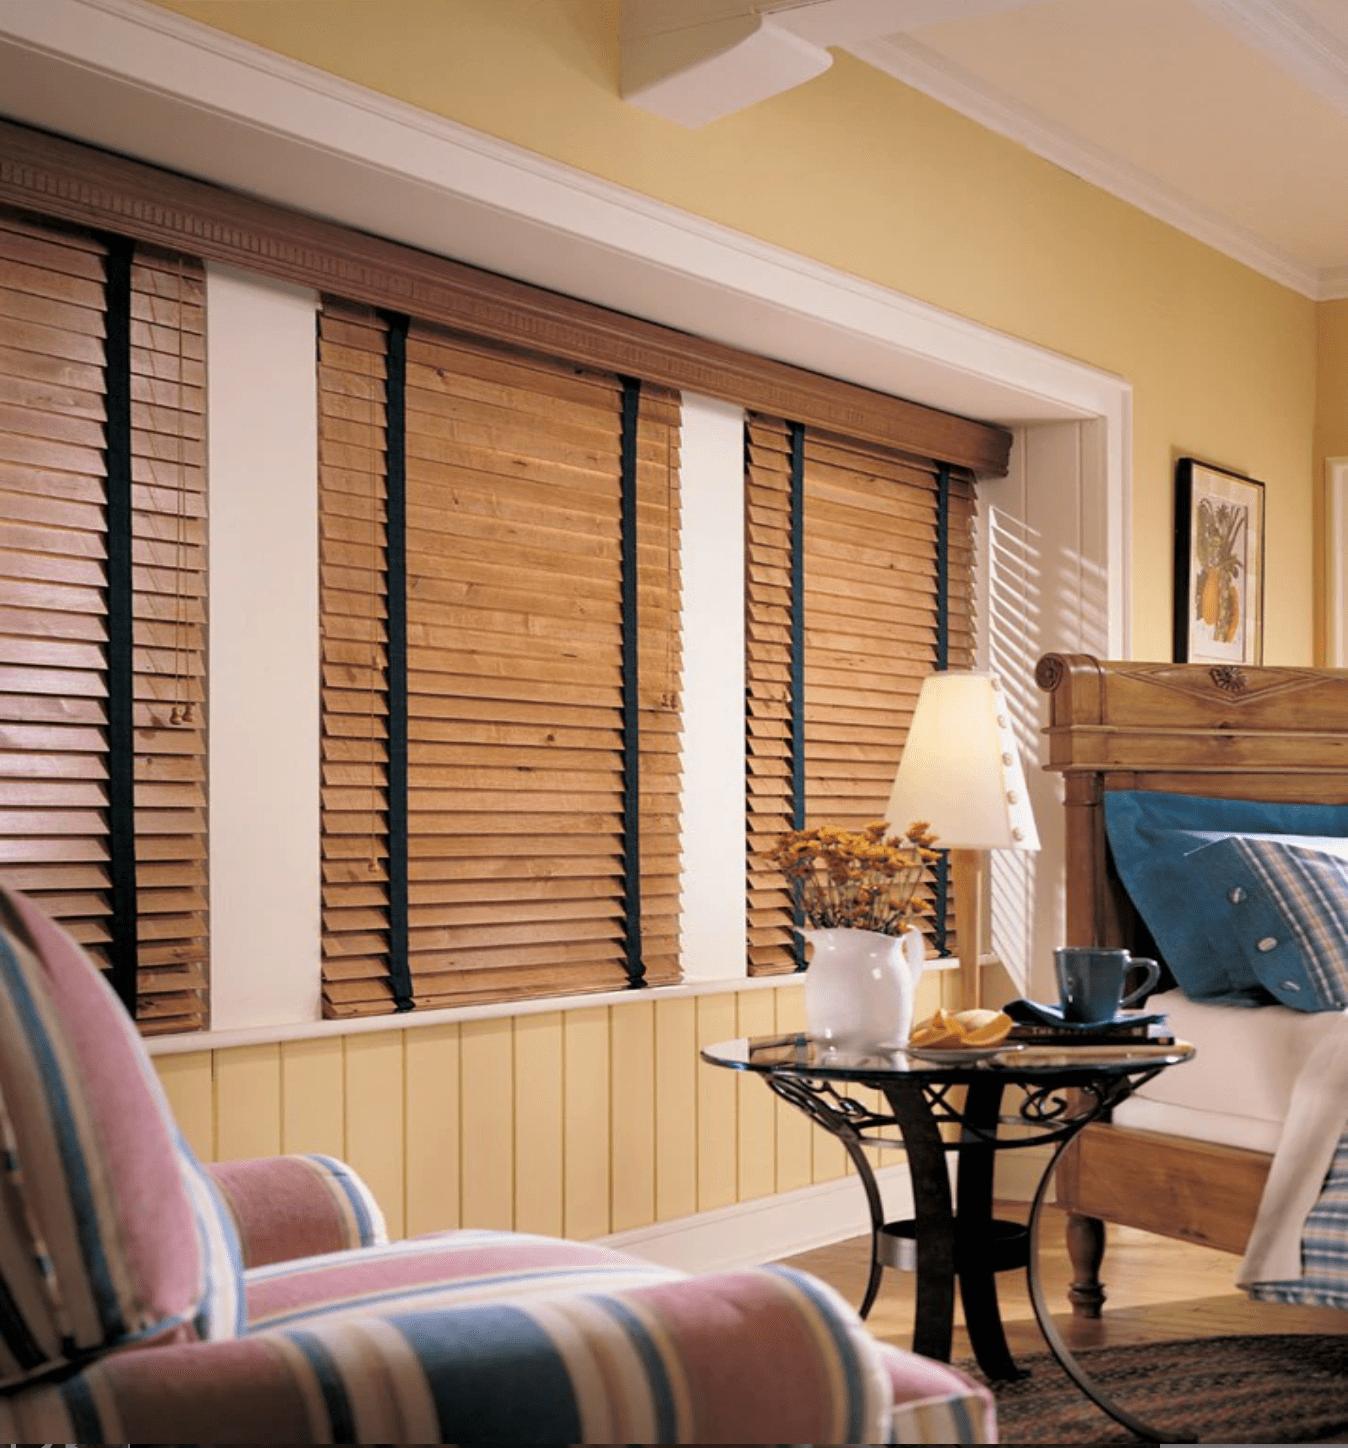 2 Inch Real Wood Blinds ?resize=768